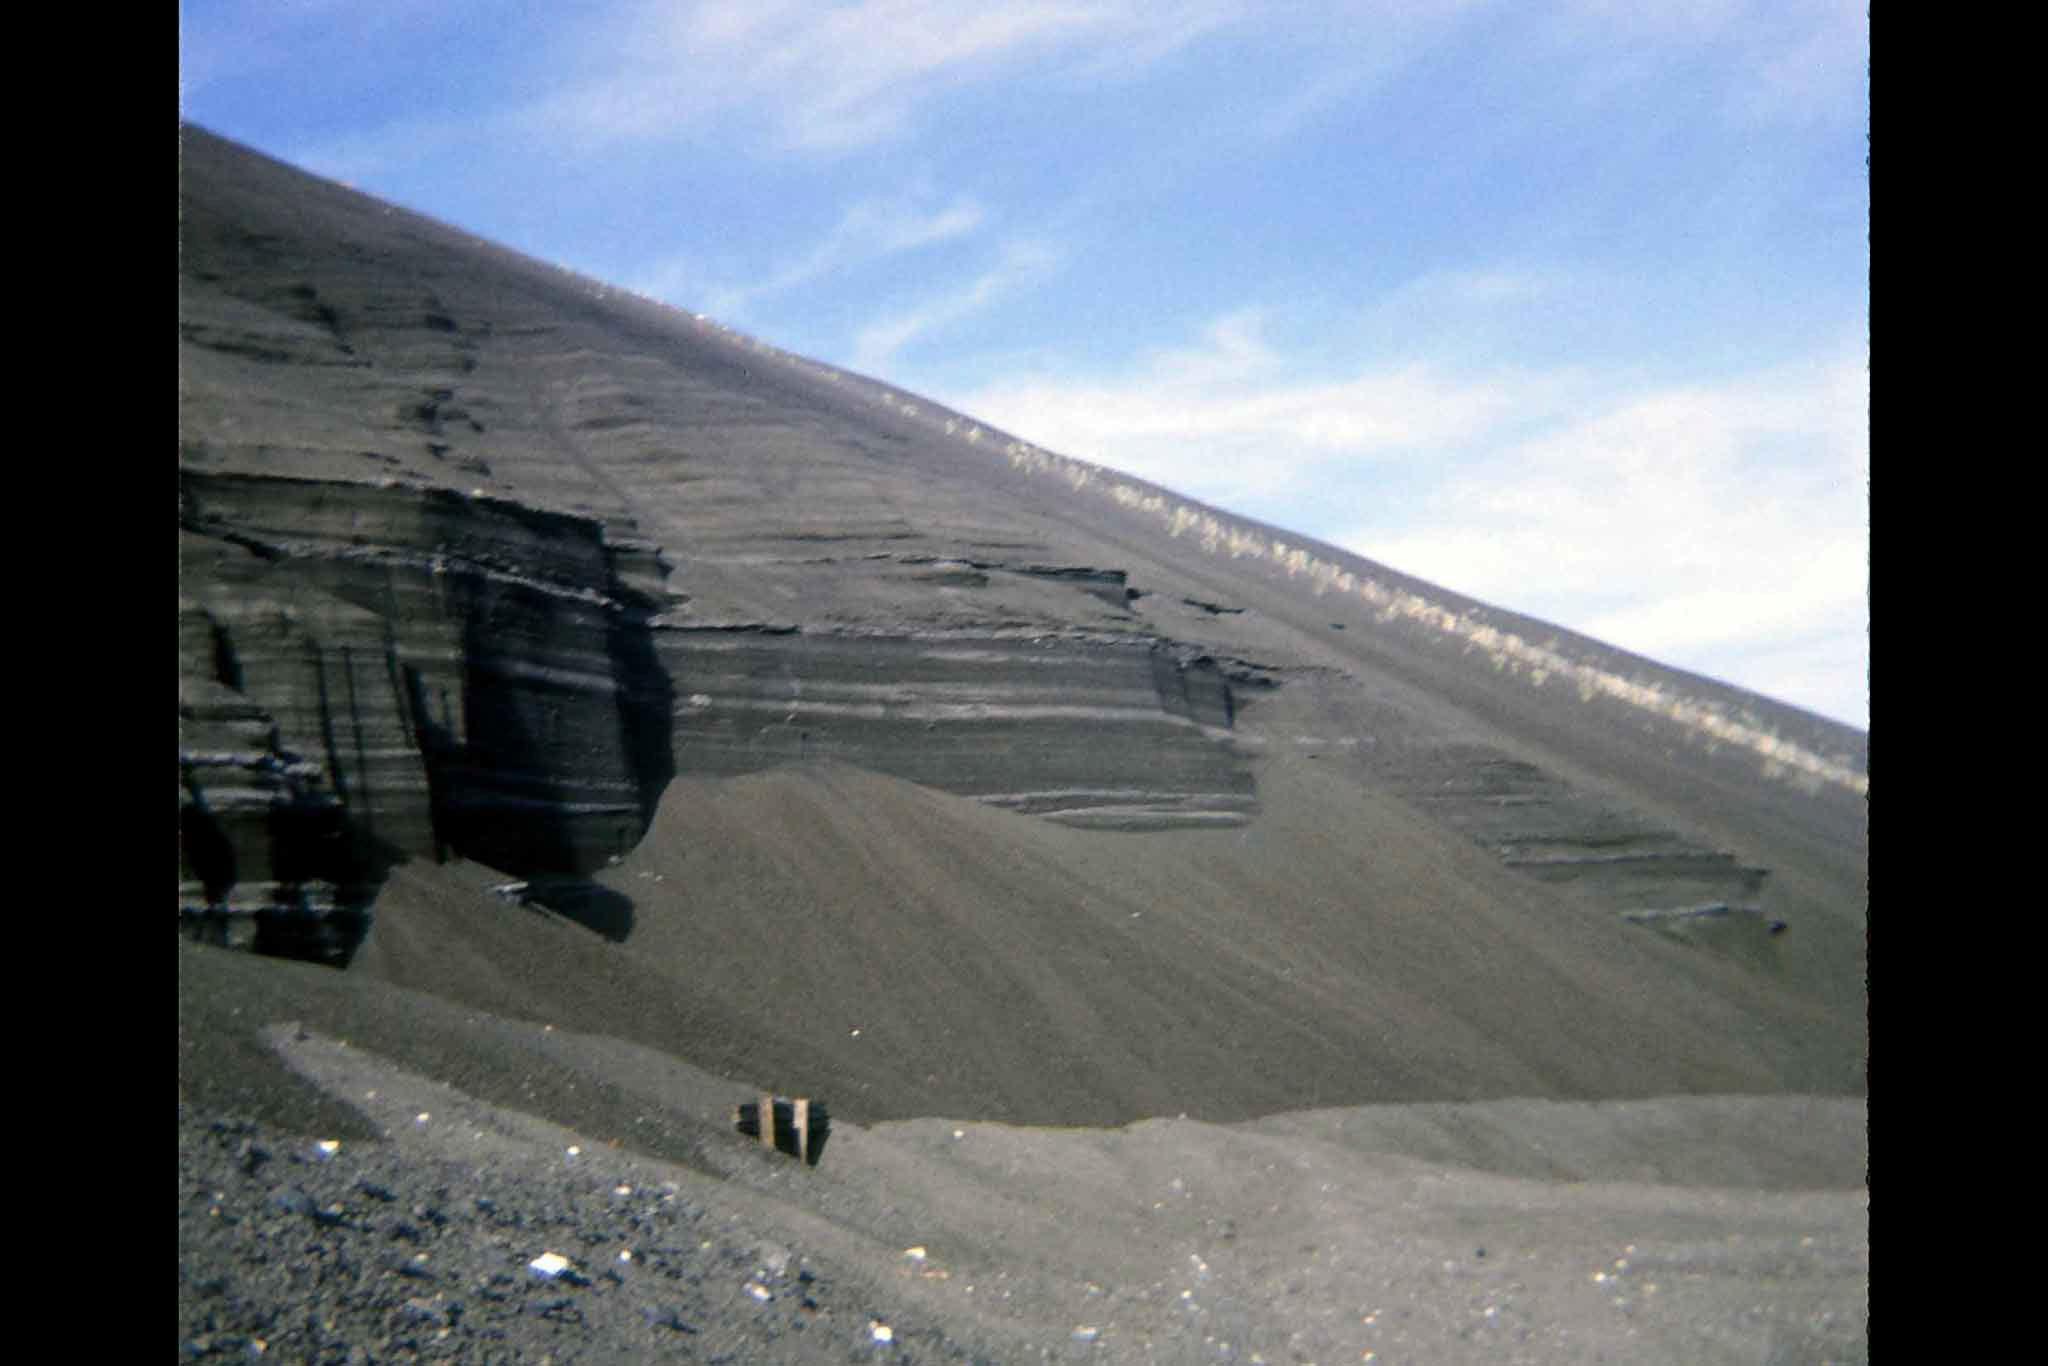 A steep slope of rock and gravel with blue sky in the background